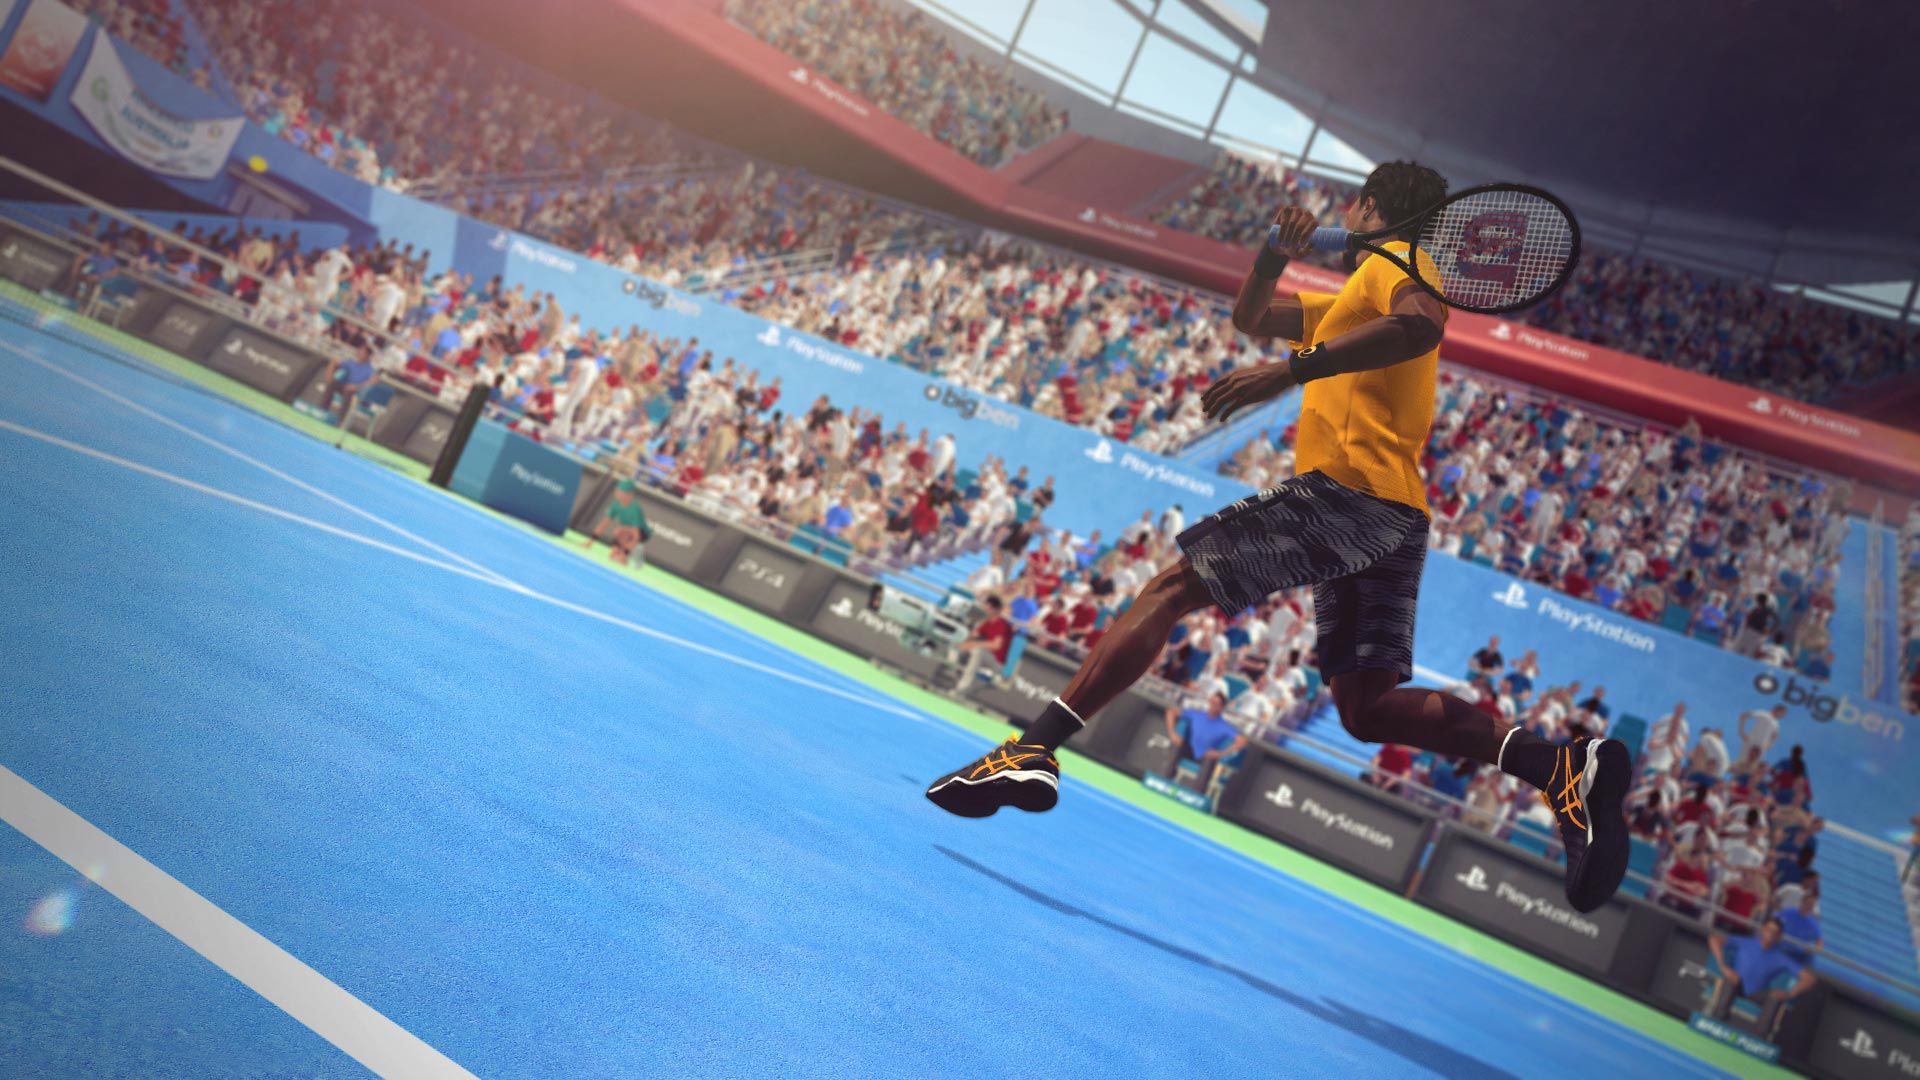 zweep schot ethiek Tennis World Tour Review -- A Poorly Served Return of Pro Tennis Video Games